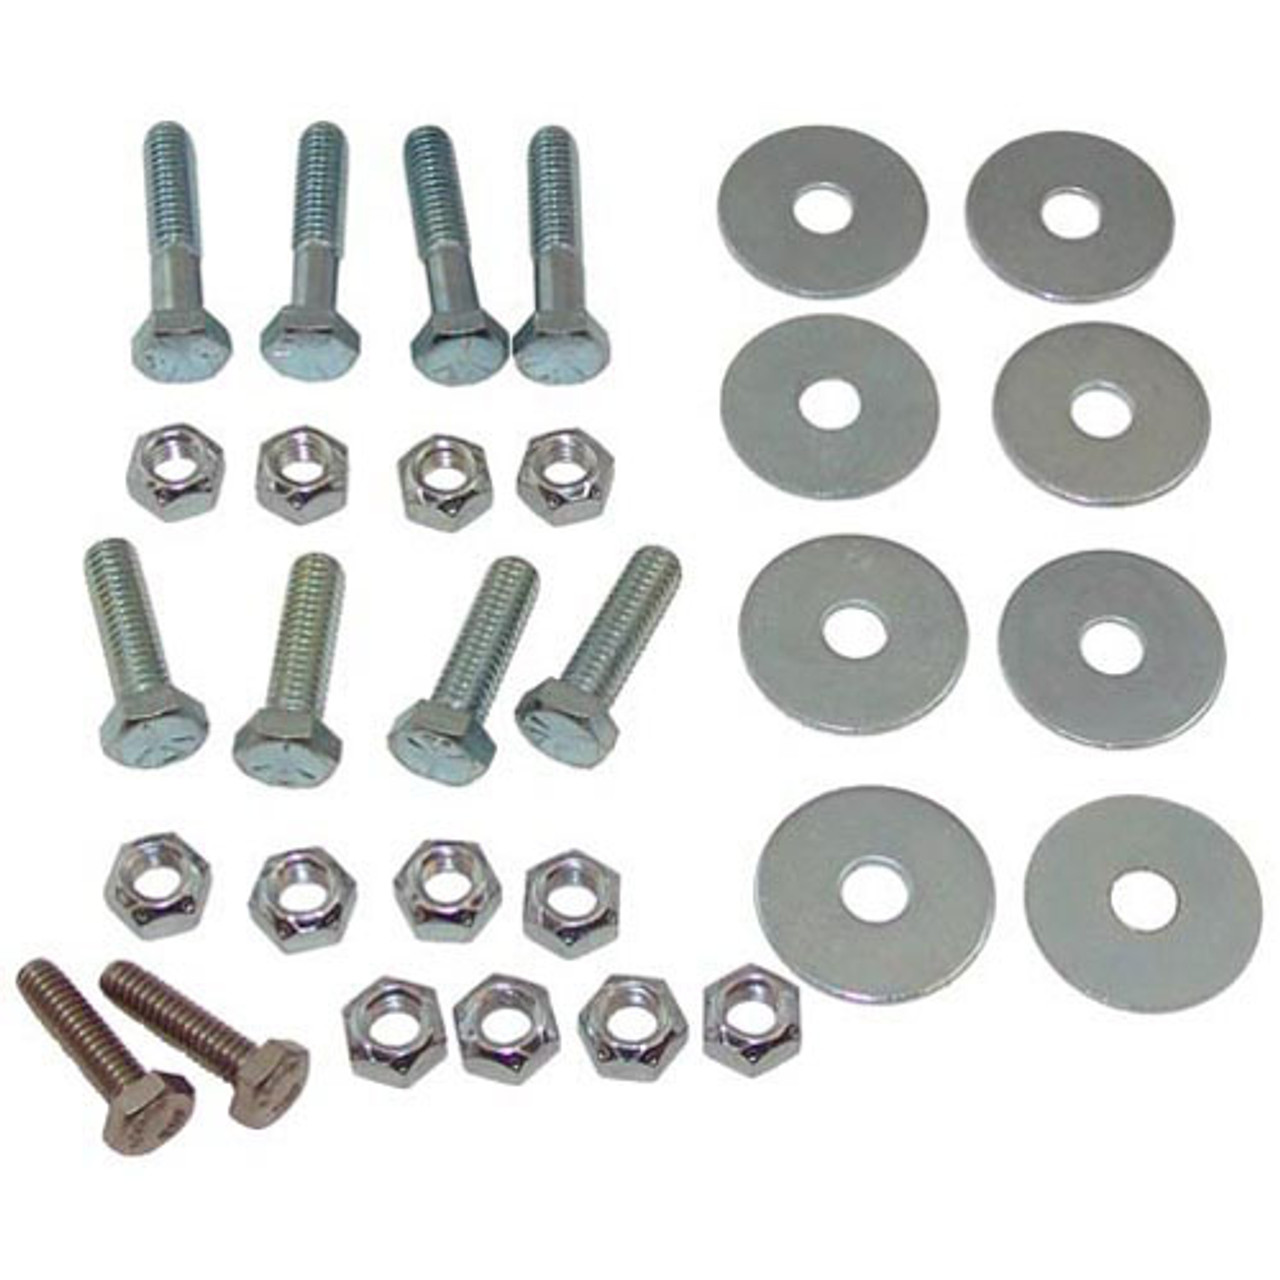 Hardware Kit - Replacement Part For Hobart 00-347119-1